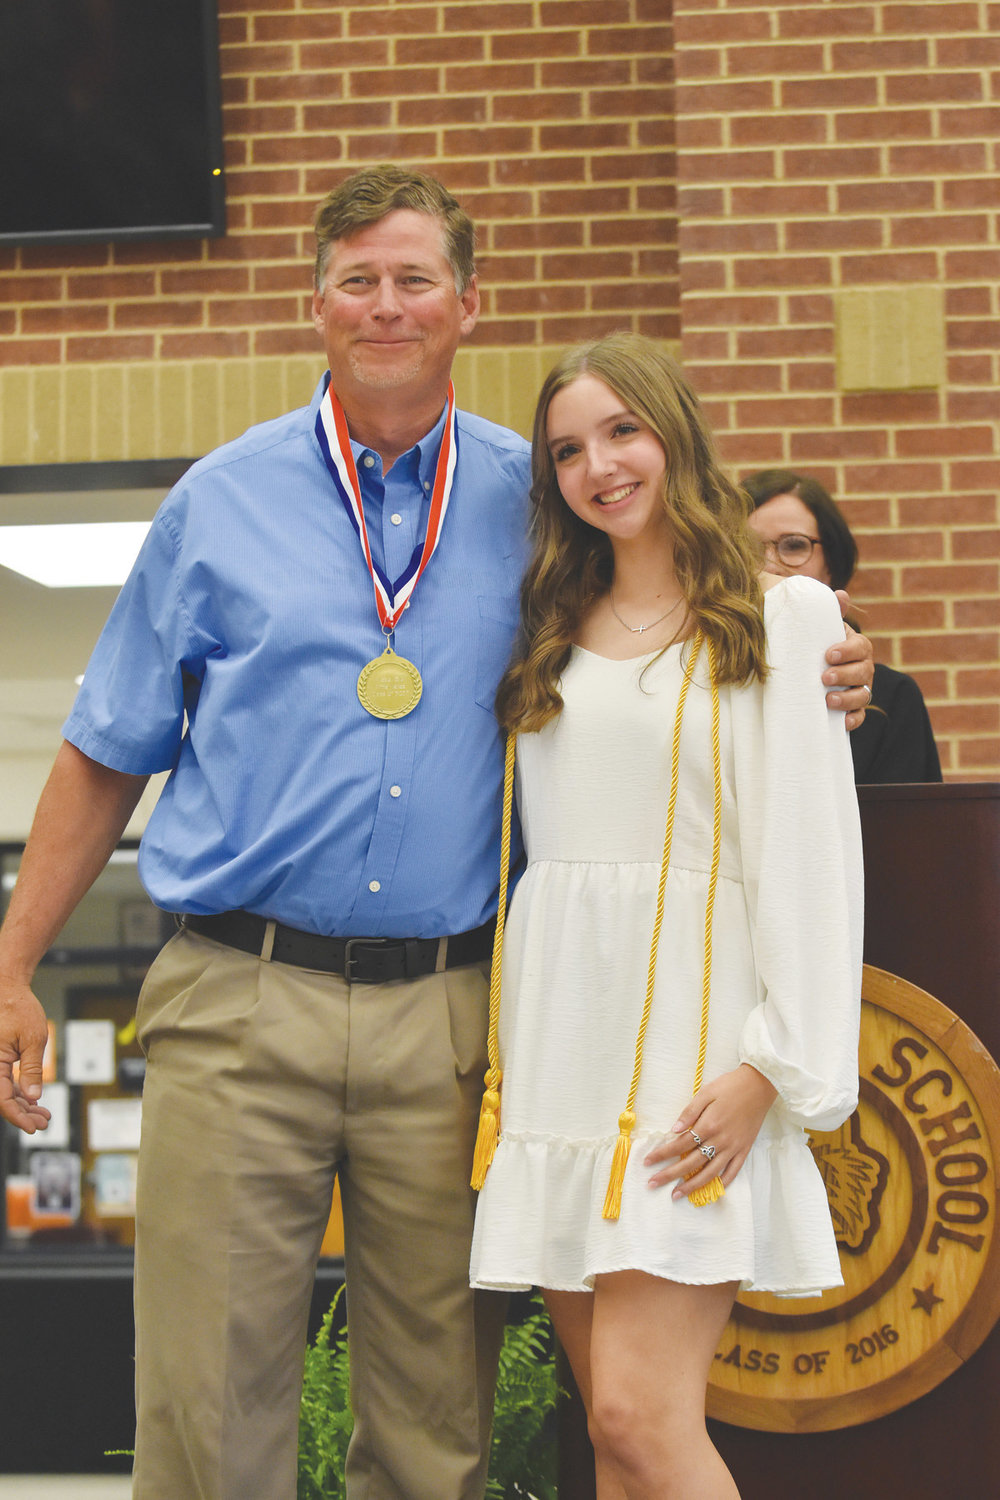 Anna Yates is the daughter of Murphy and Amy Yates. Anna plans to attend Texas A&M University, major in kinesiology with a concentration in dance science, in hopes of becoming an occupational or physical therapist. She honored Coach Brad McCone.